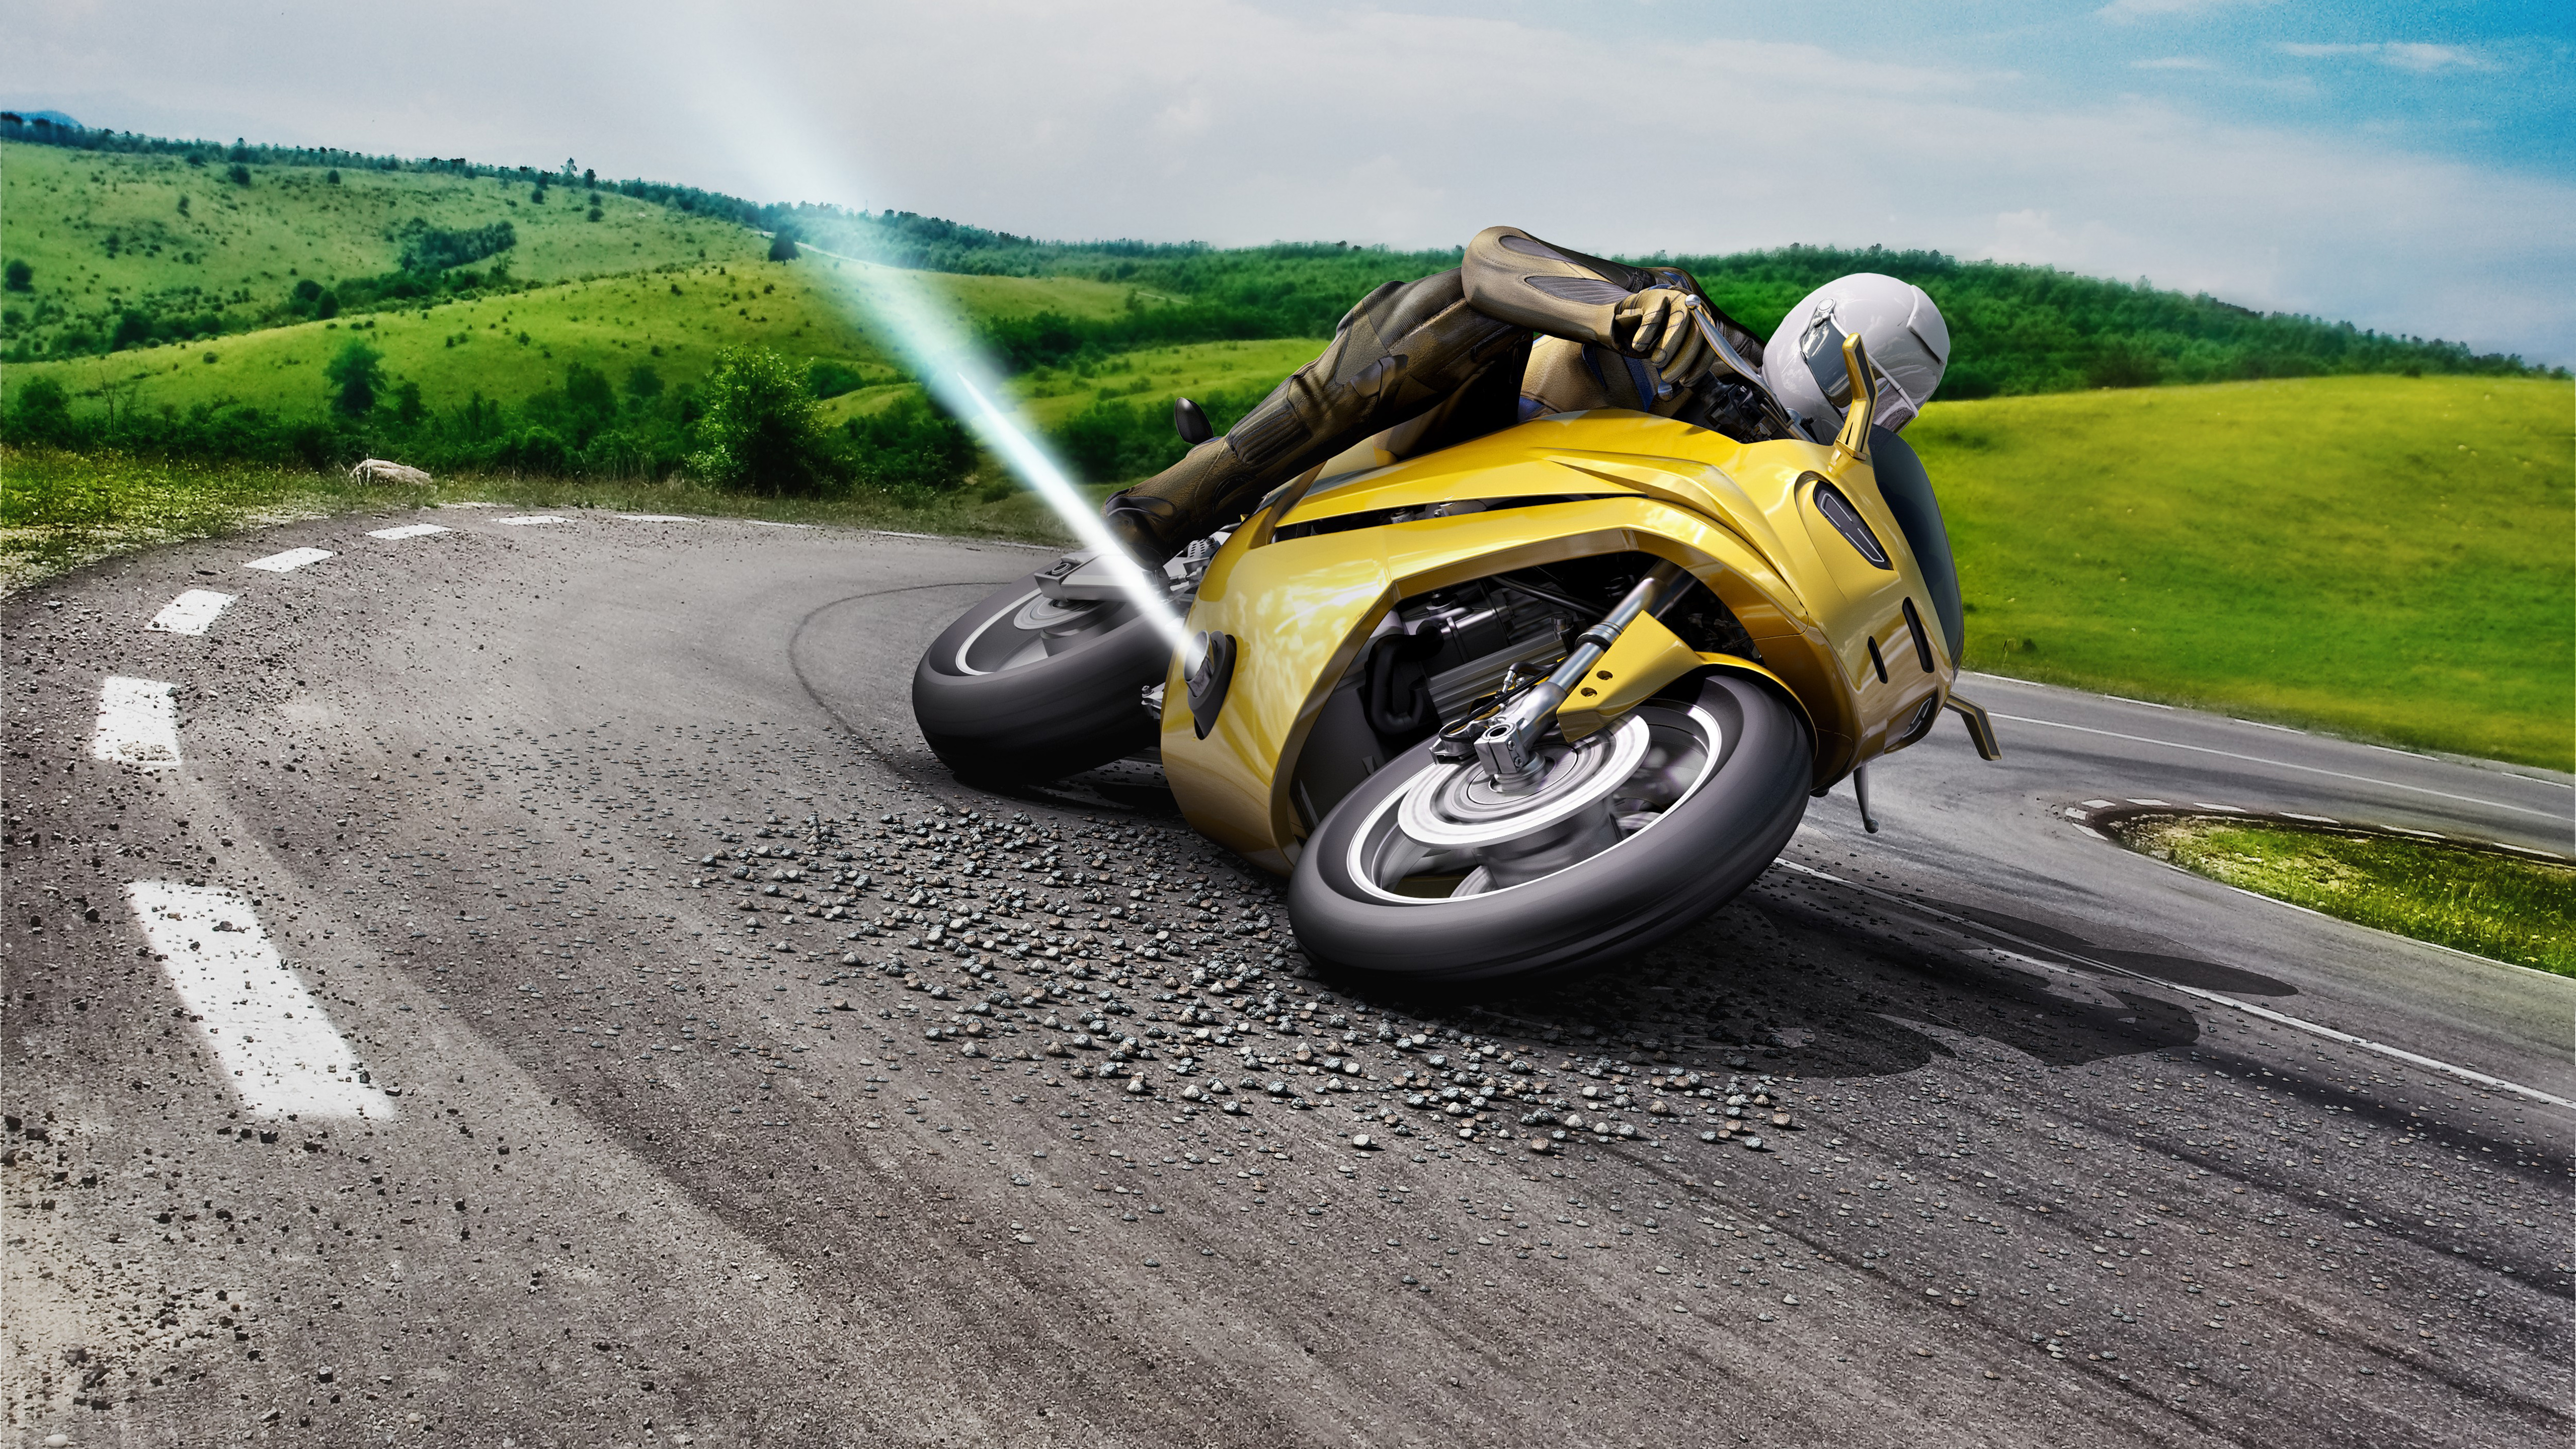 Motorcycle stability control by Bosch 5K